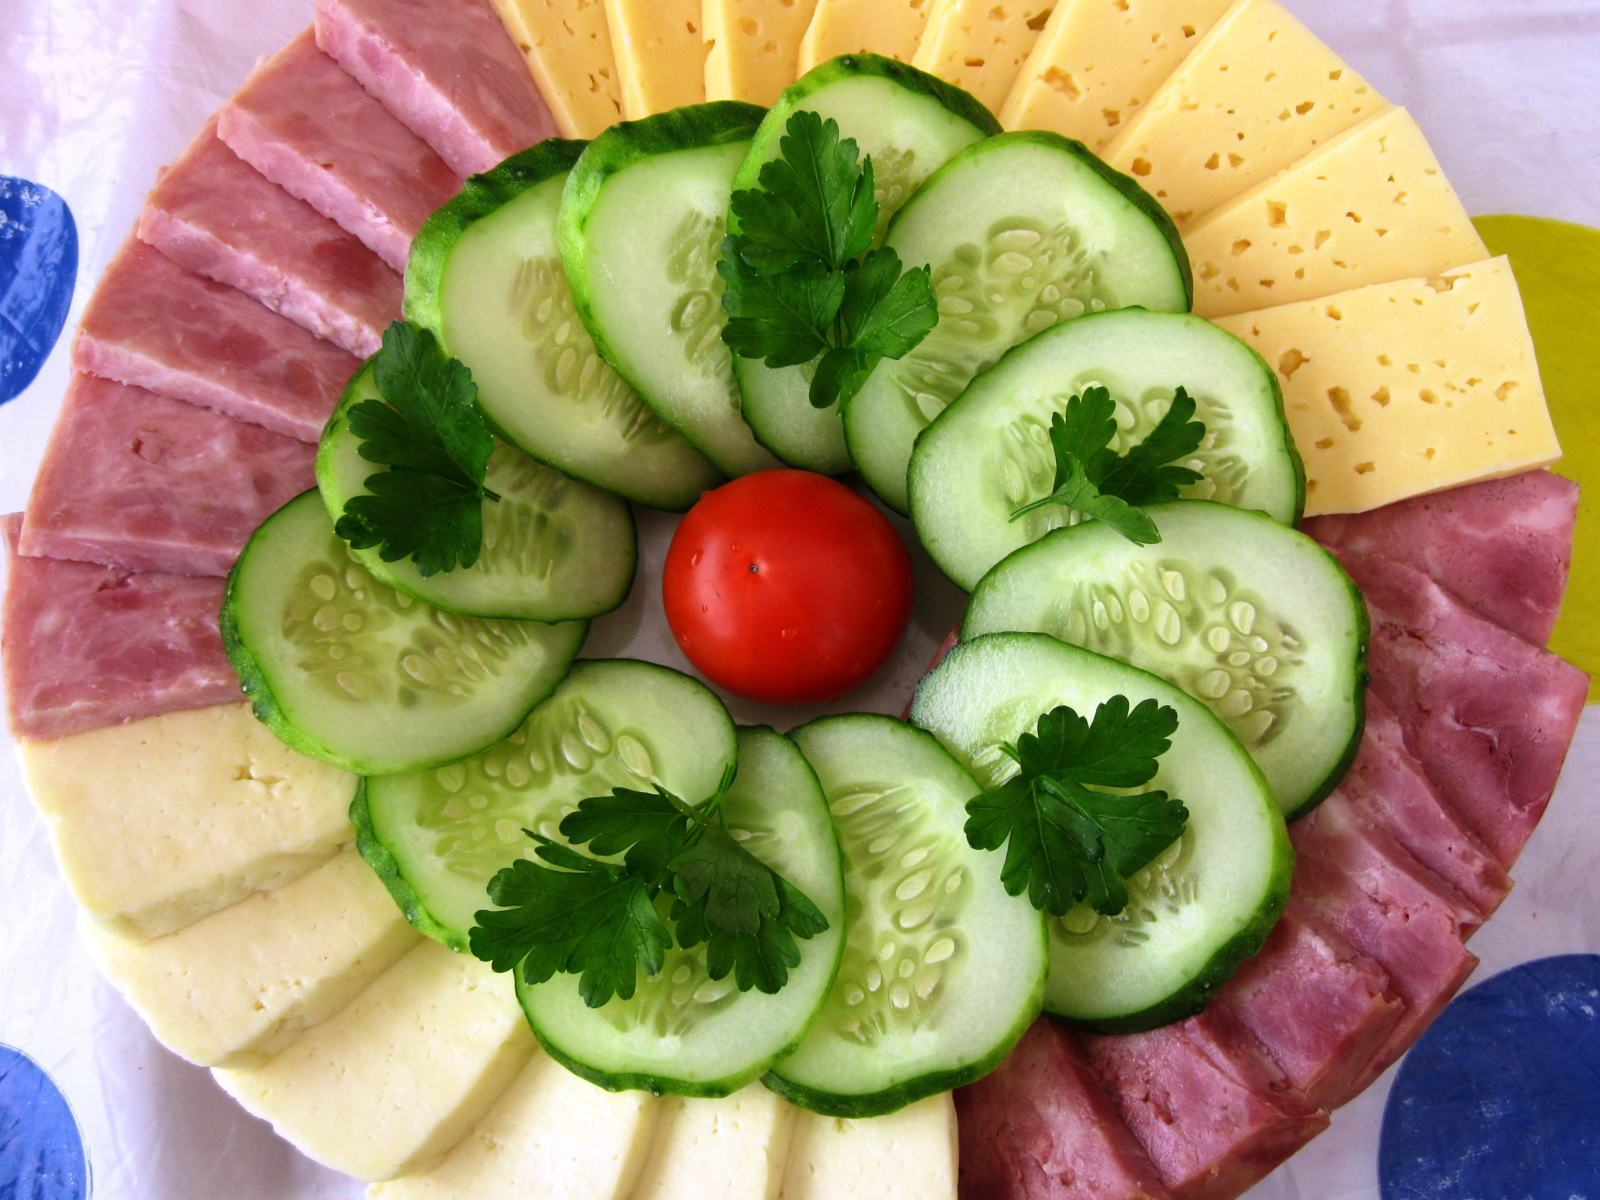 Sliced cheese, cucumbers and ham on a plate